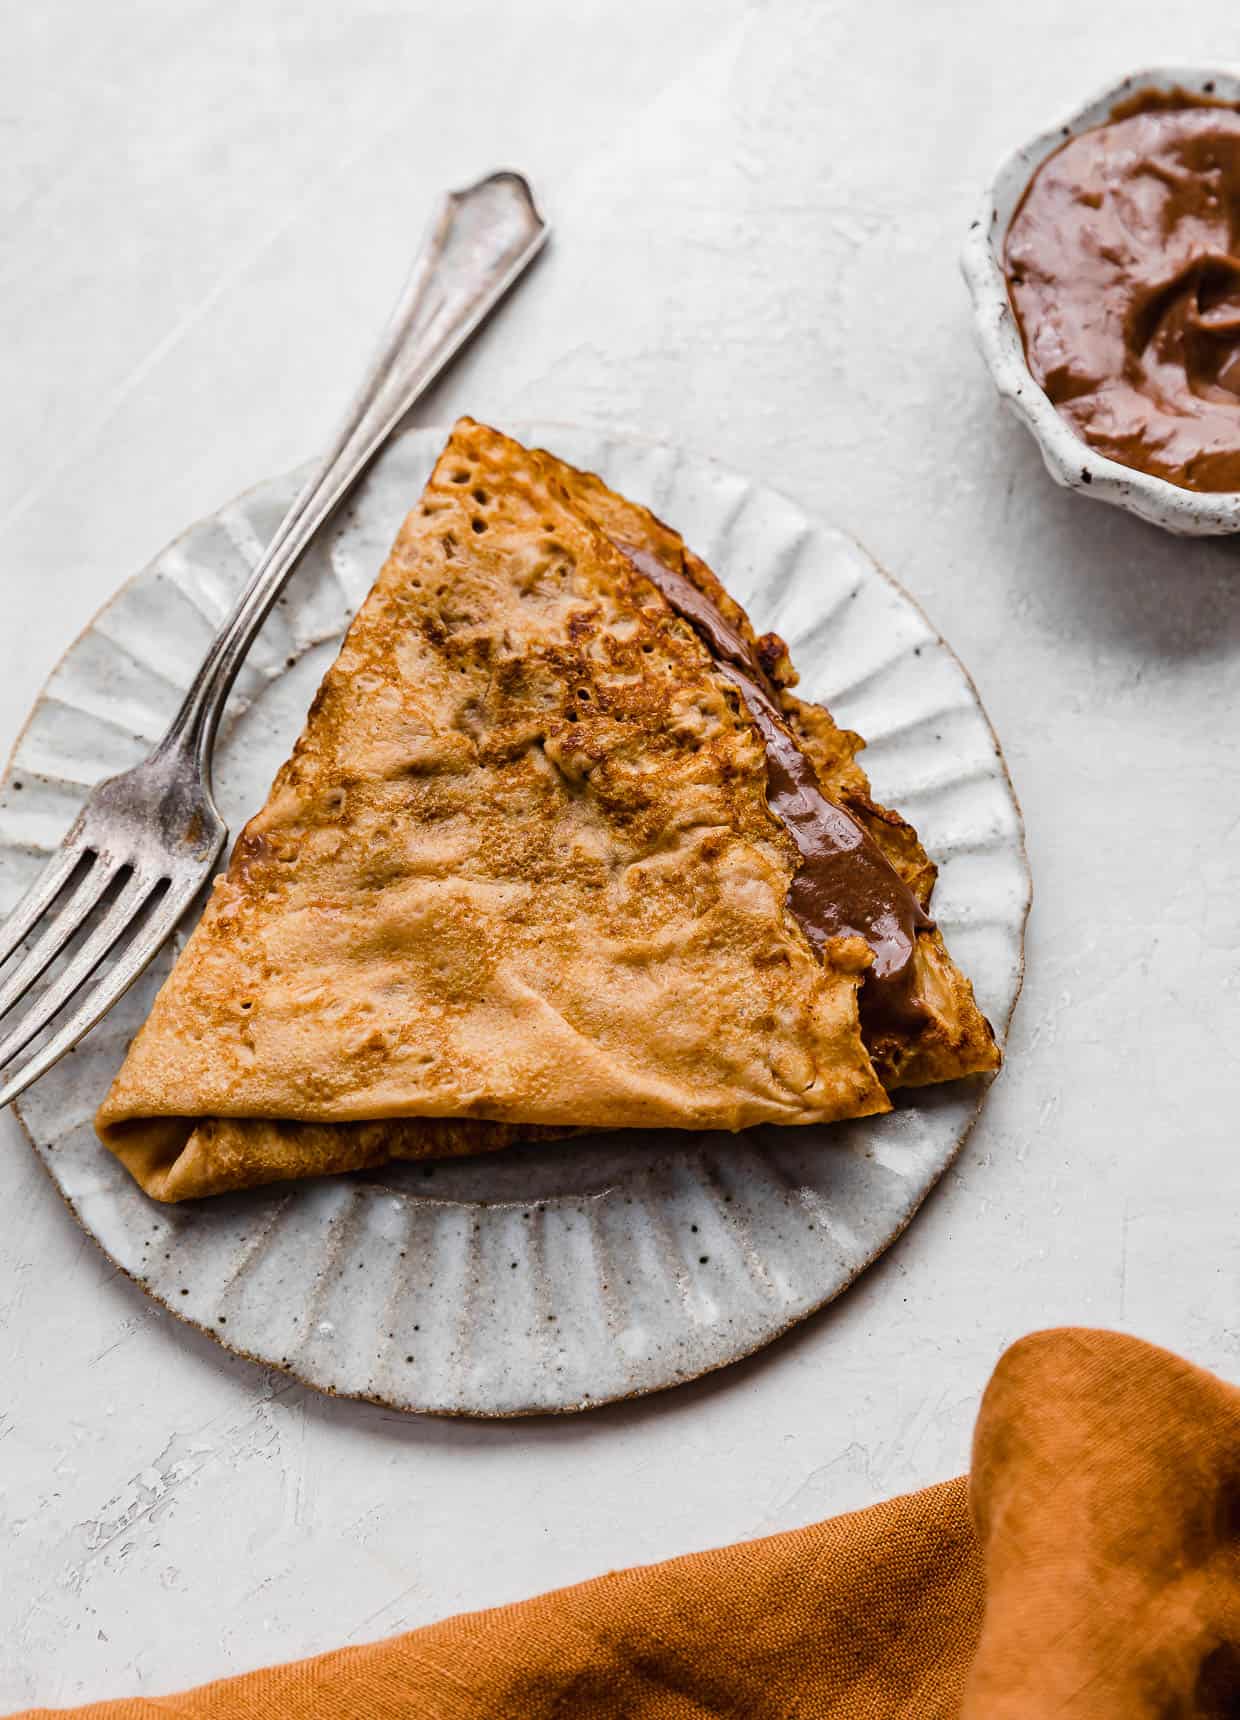 A Pumpkin Crepe filled with whipped nutella folded into a triangle, on a white plate.